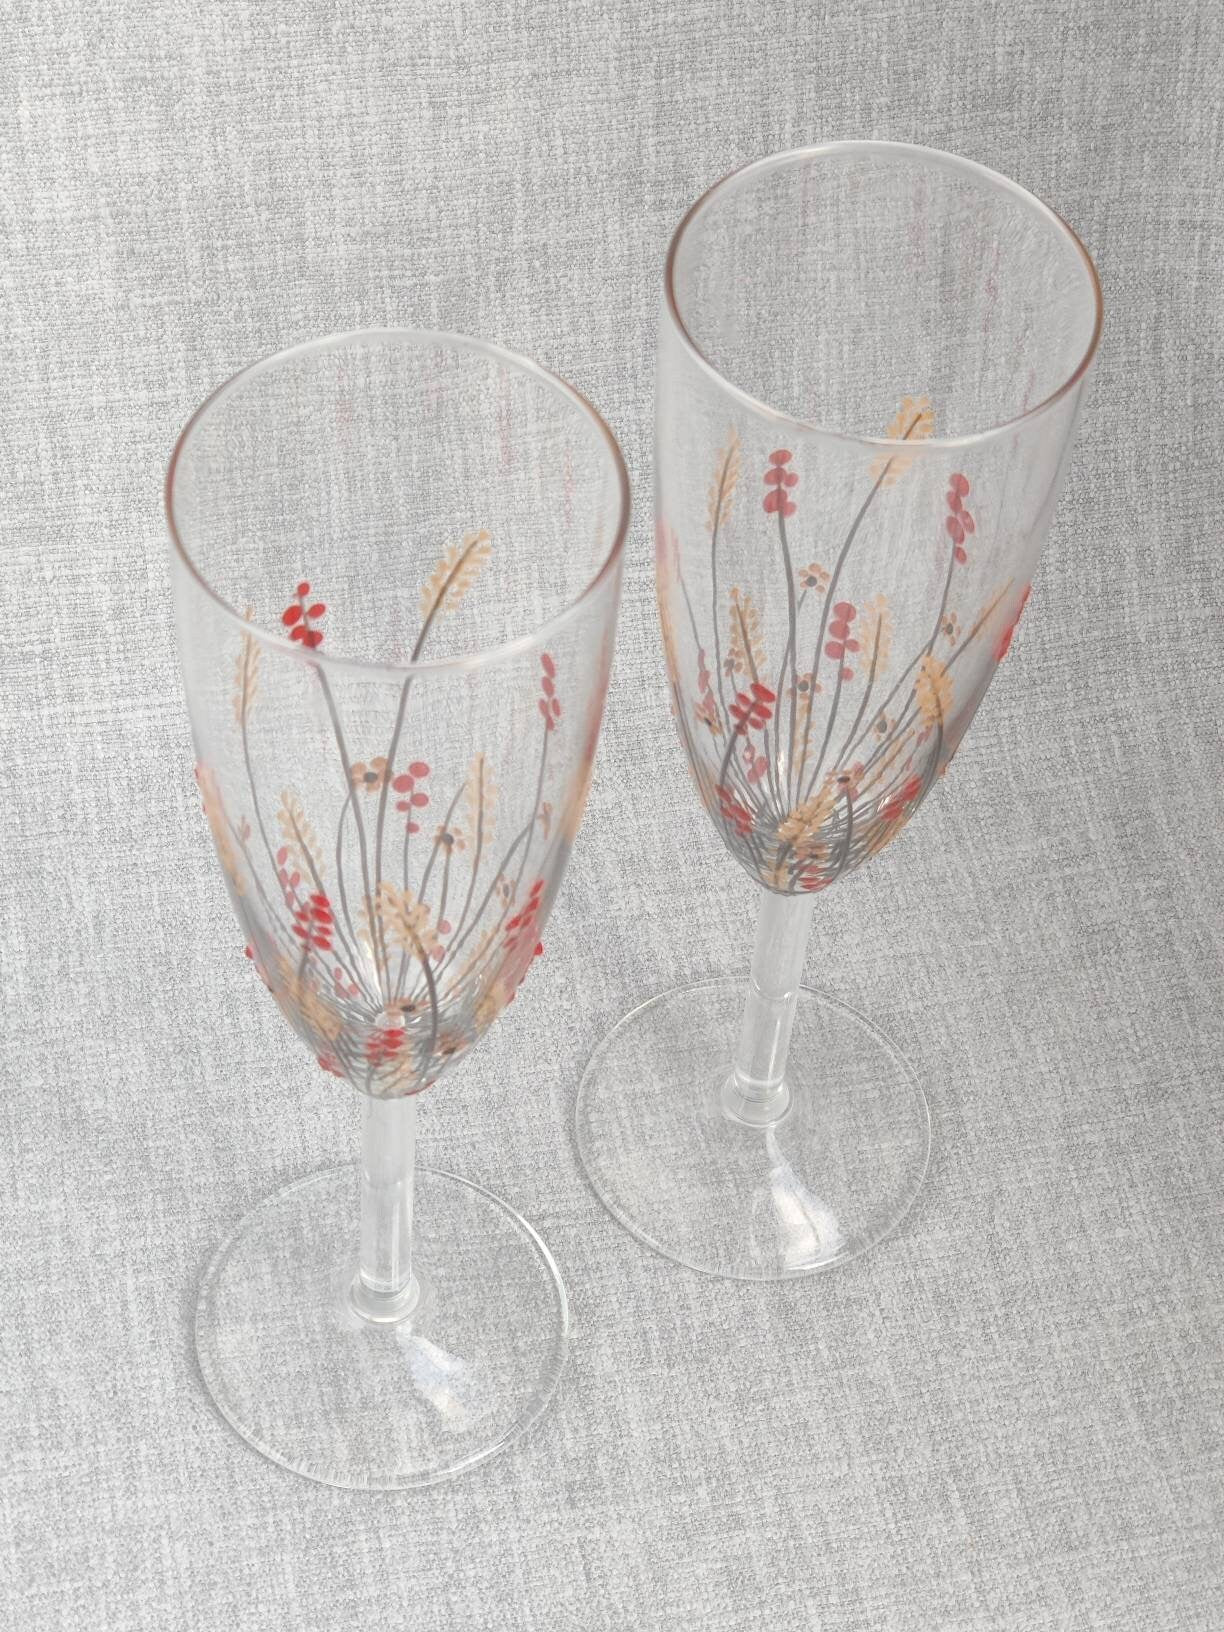 Pair of Hand-painted 'Autumn Meadow' champagne /prosecco Glass